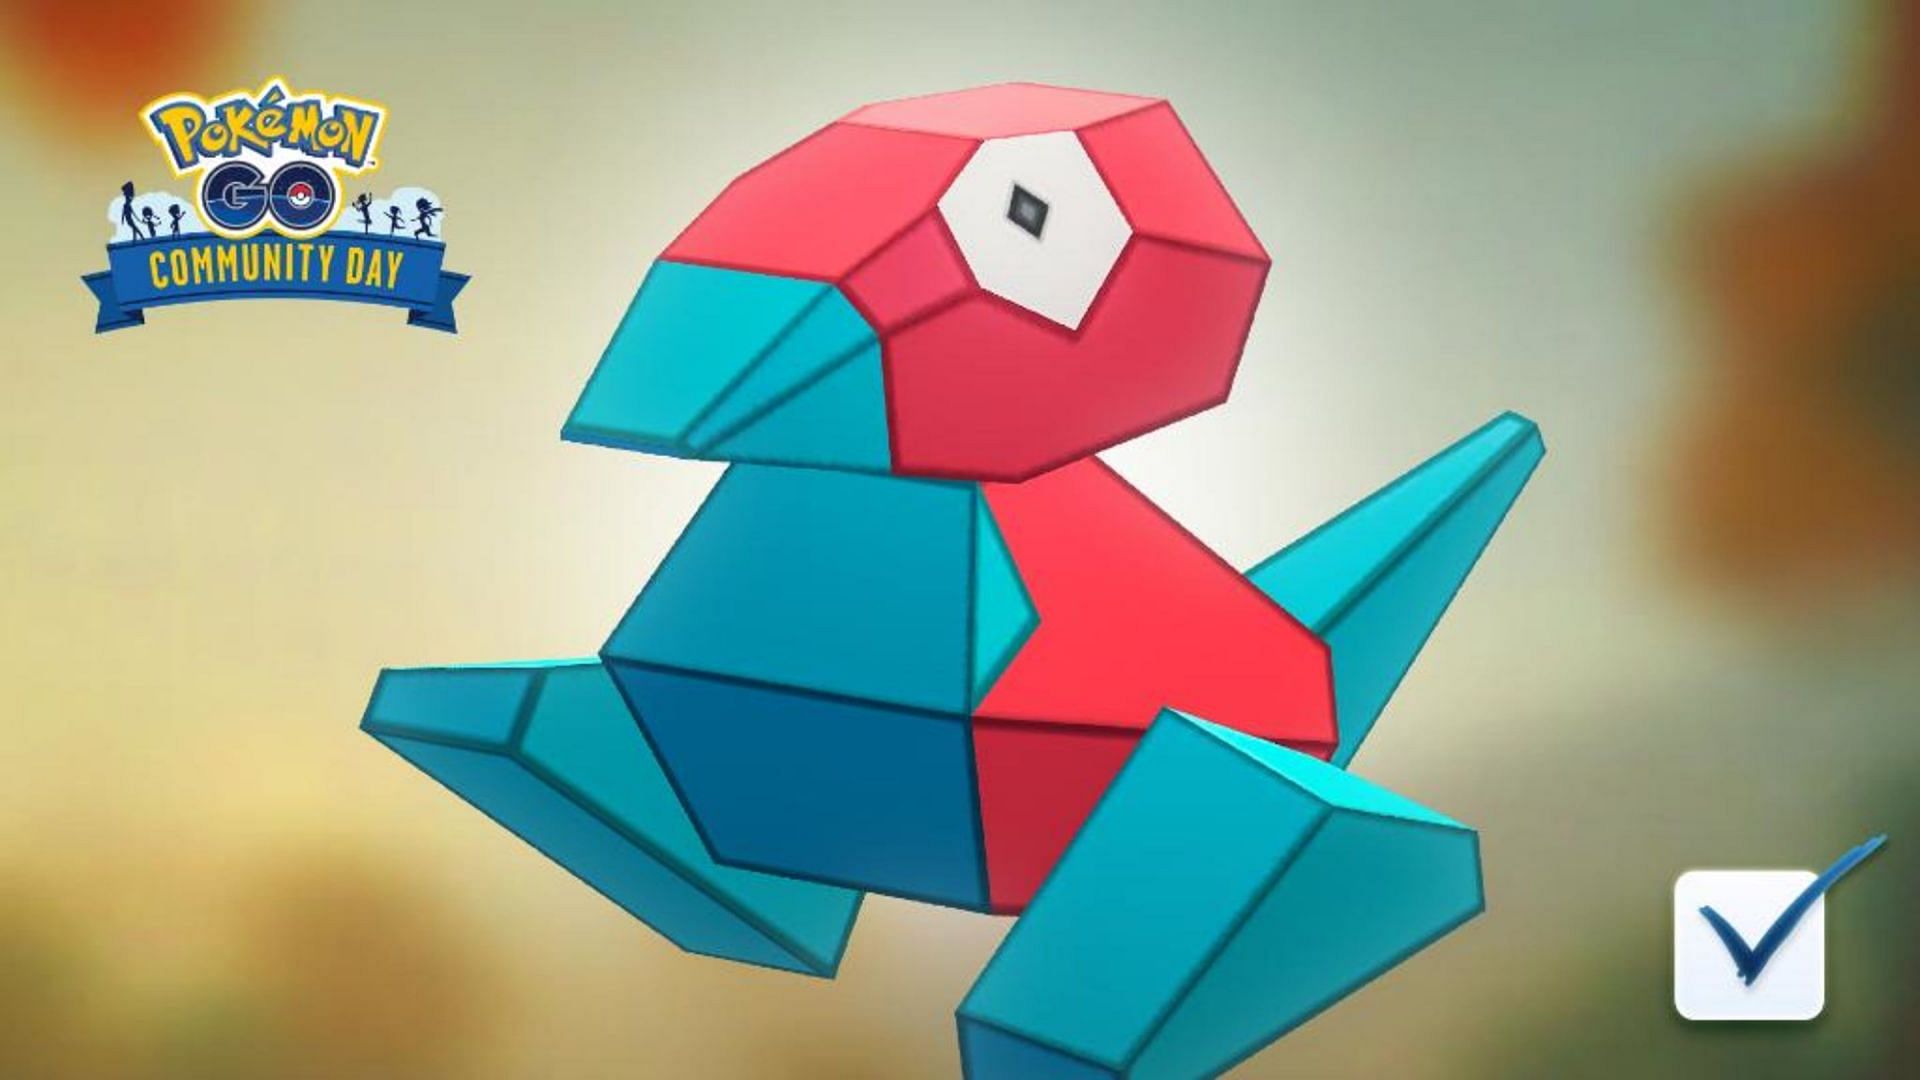 At the moment, the only Pokemon GO Pokemon that benefits from Up-Grade is Porygon (Image via Niantic)